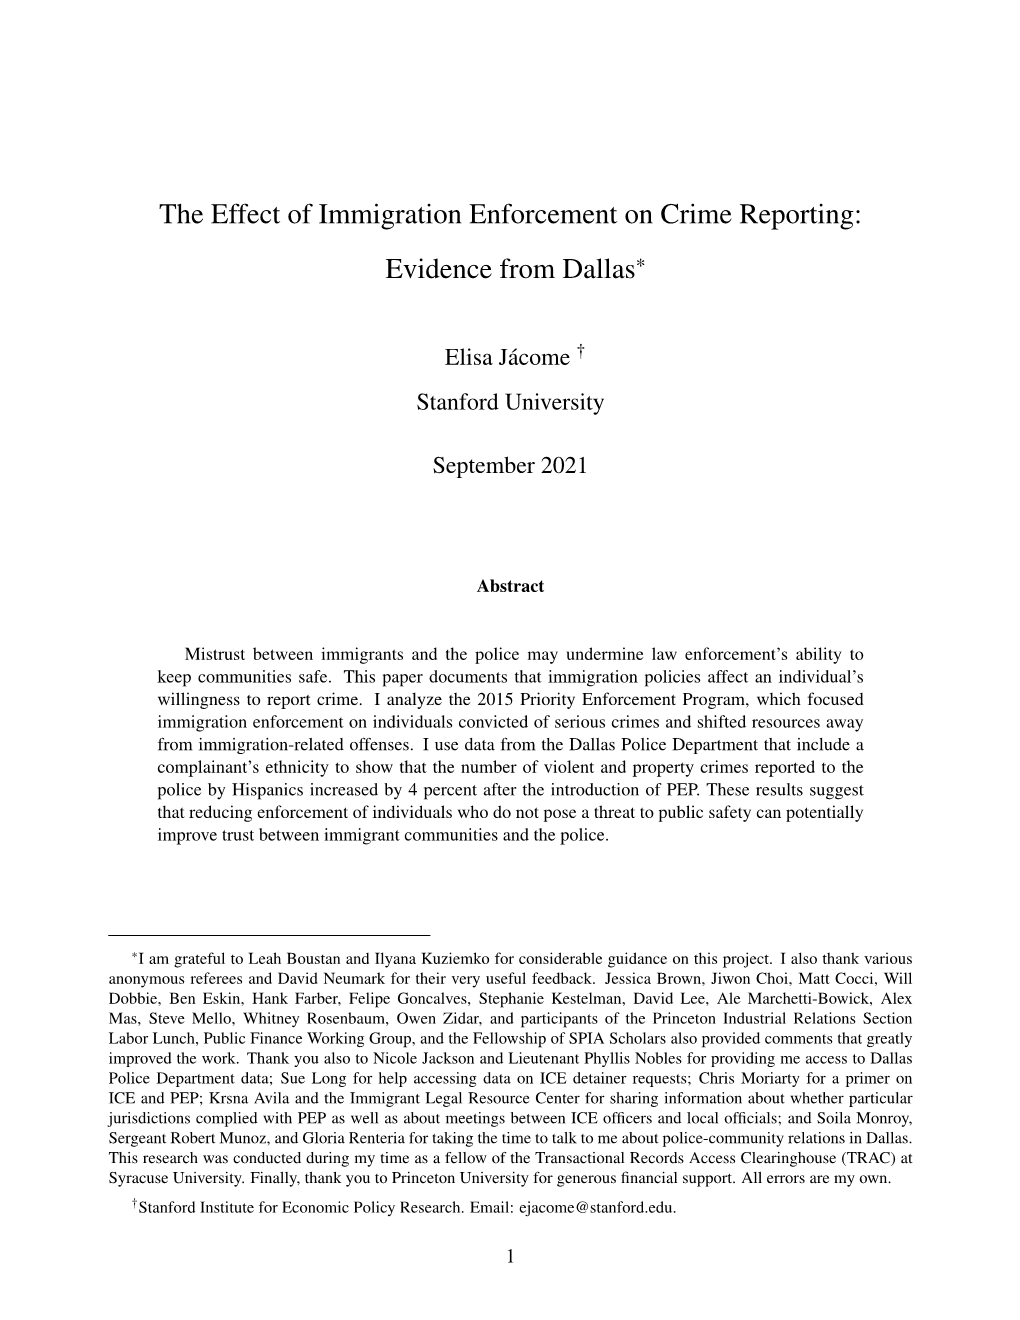 The Effect of Immigration Enforcement on Crime Reporting: Evidence from Dallas*